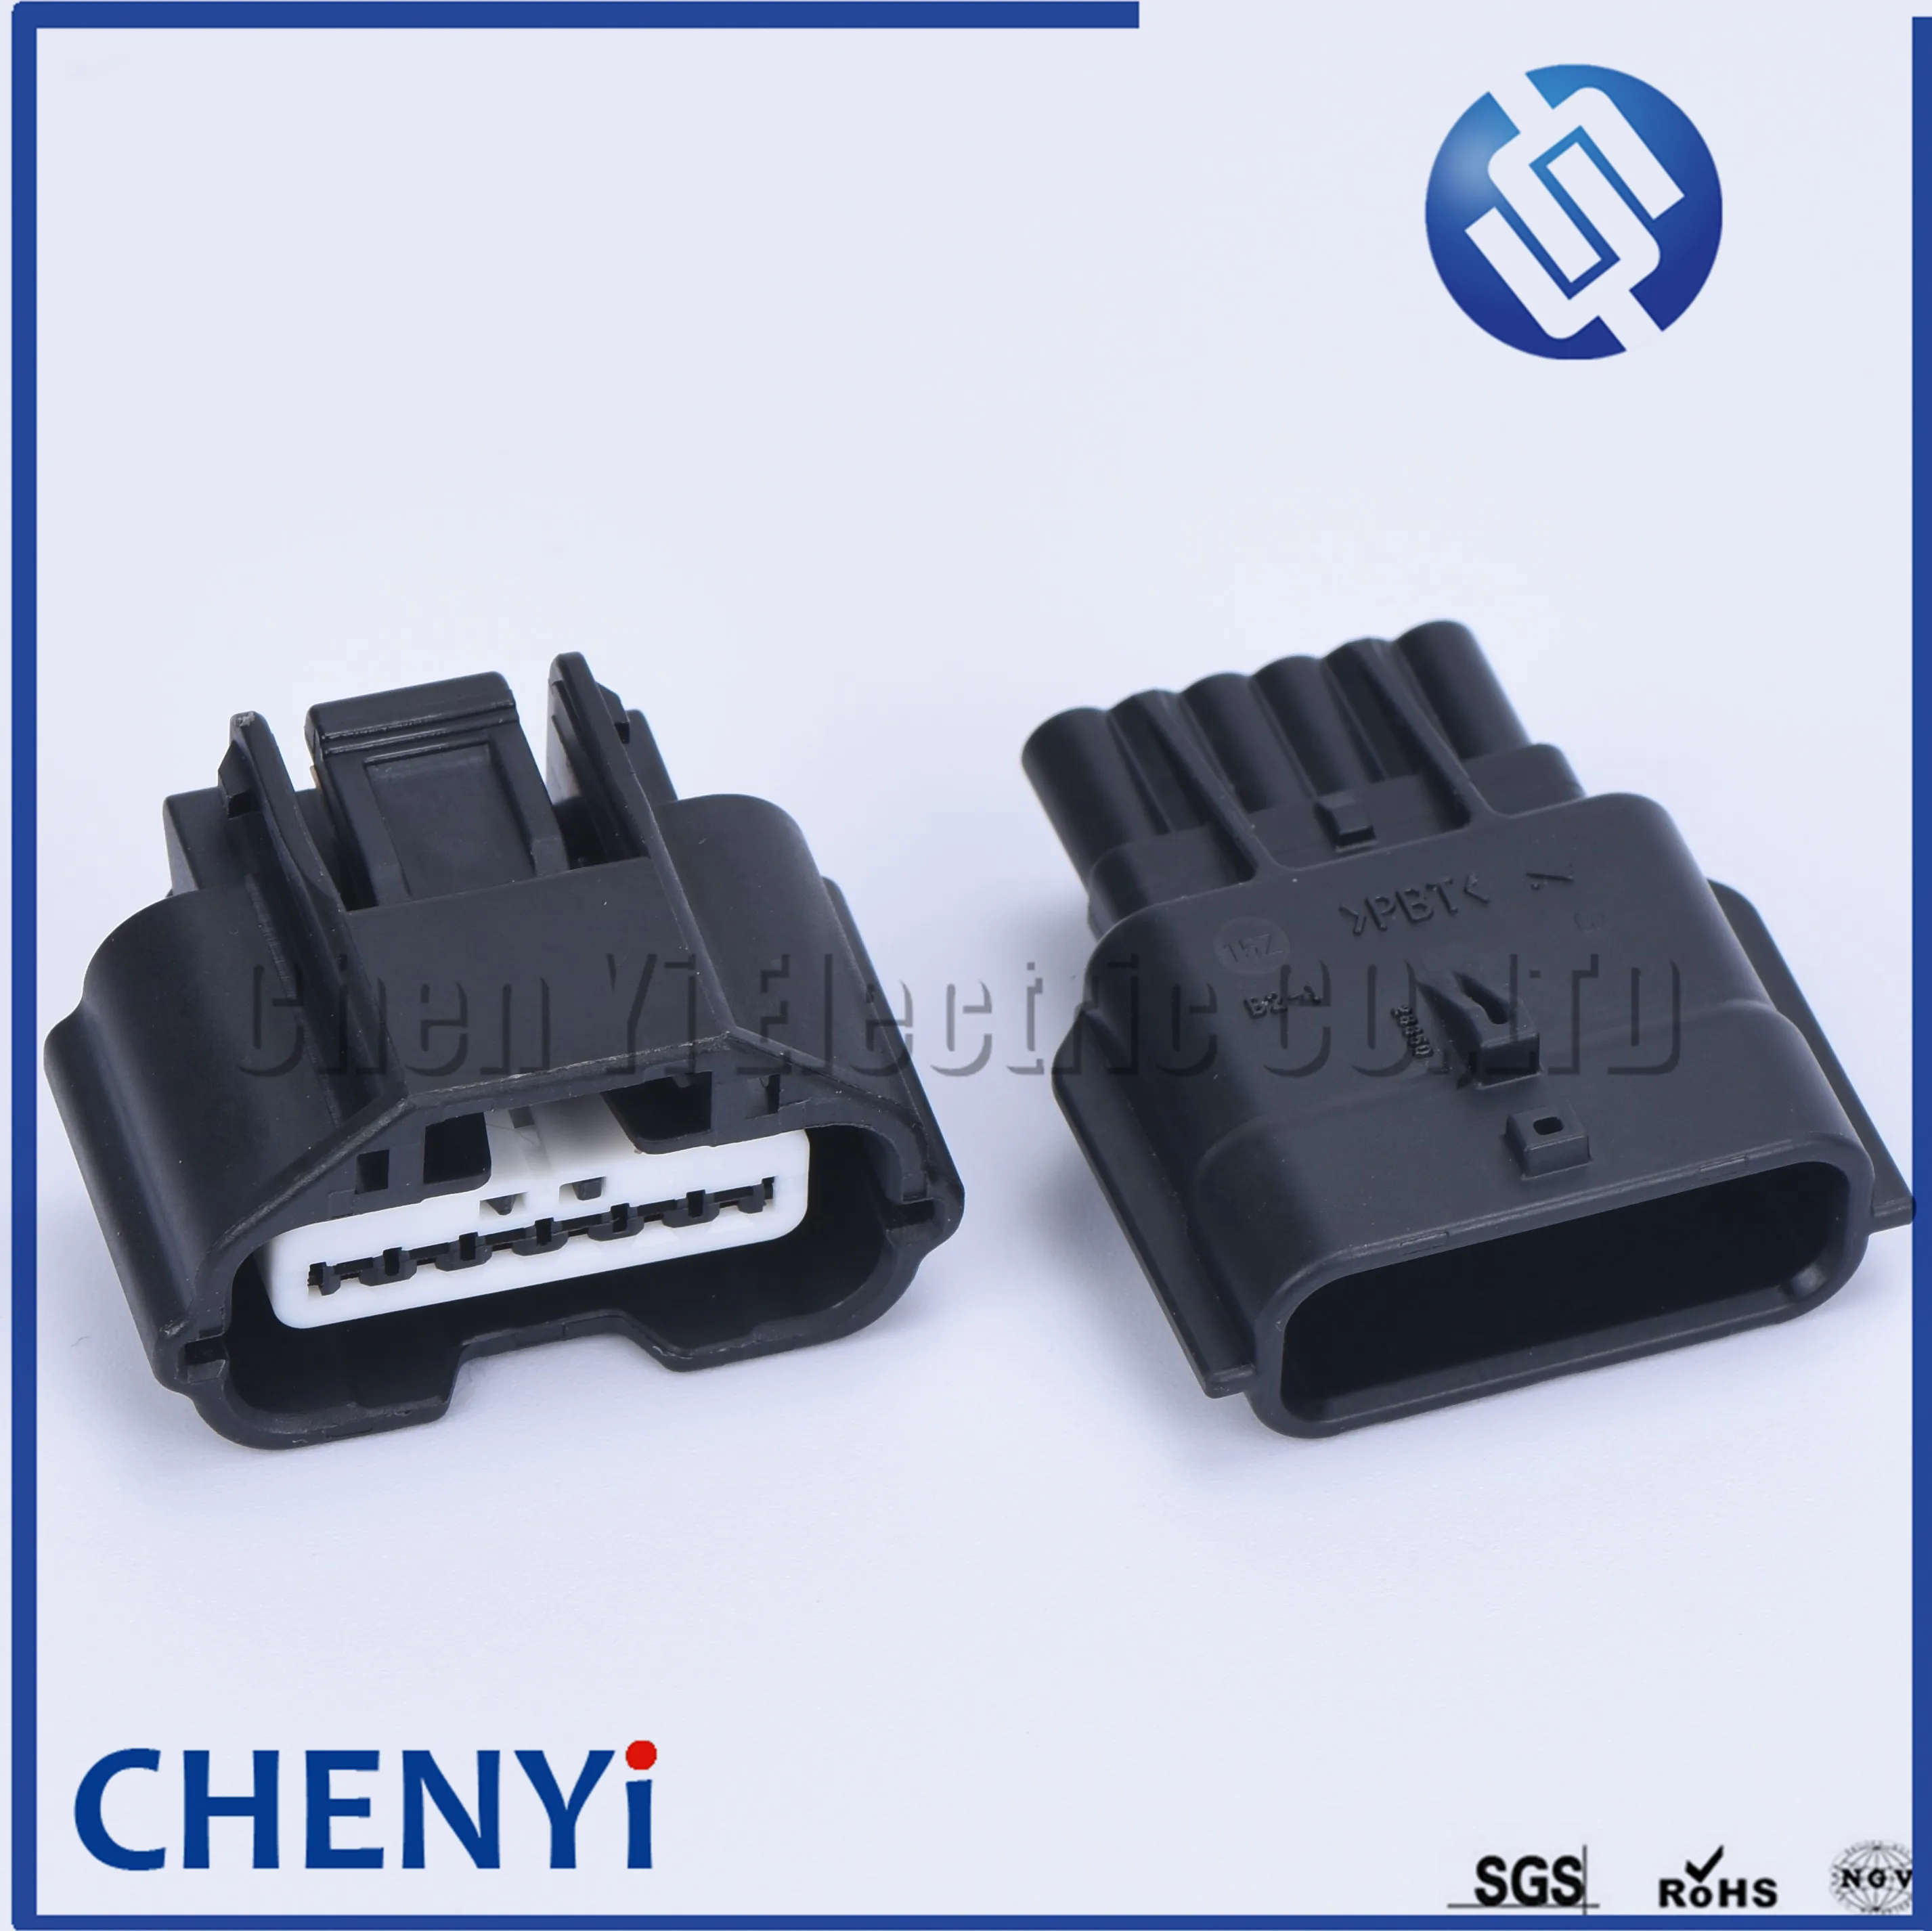 1 set 6 Pin (0.6)female or male car PDC parking sensors waterproof auto  Harness connector MG643284-5 for Toyota Hyundai